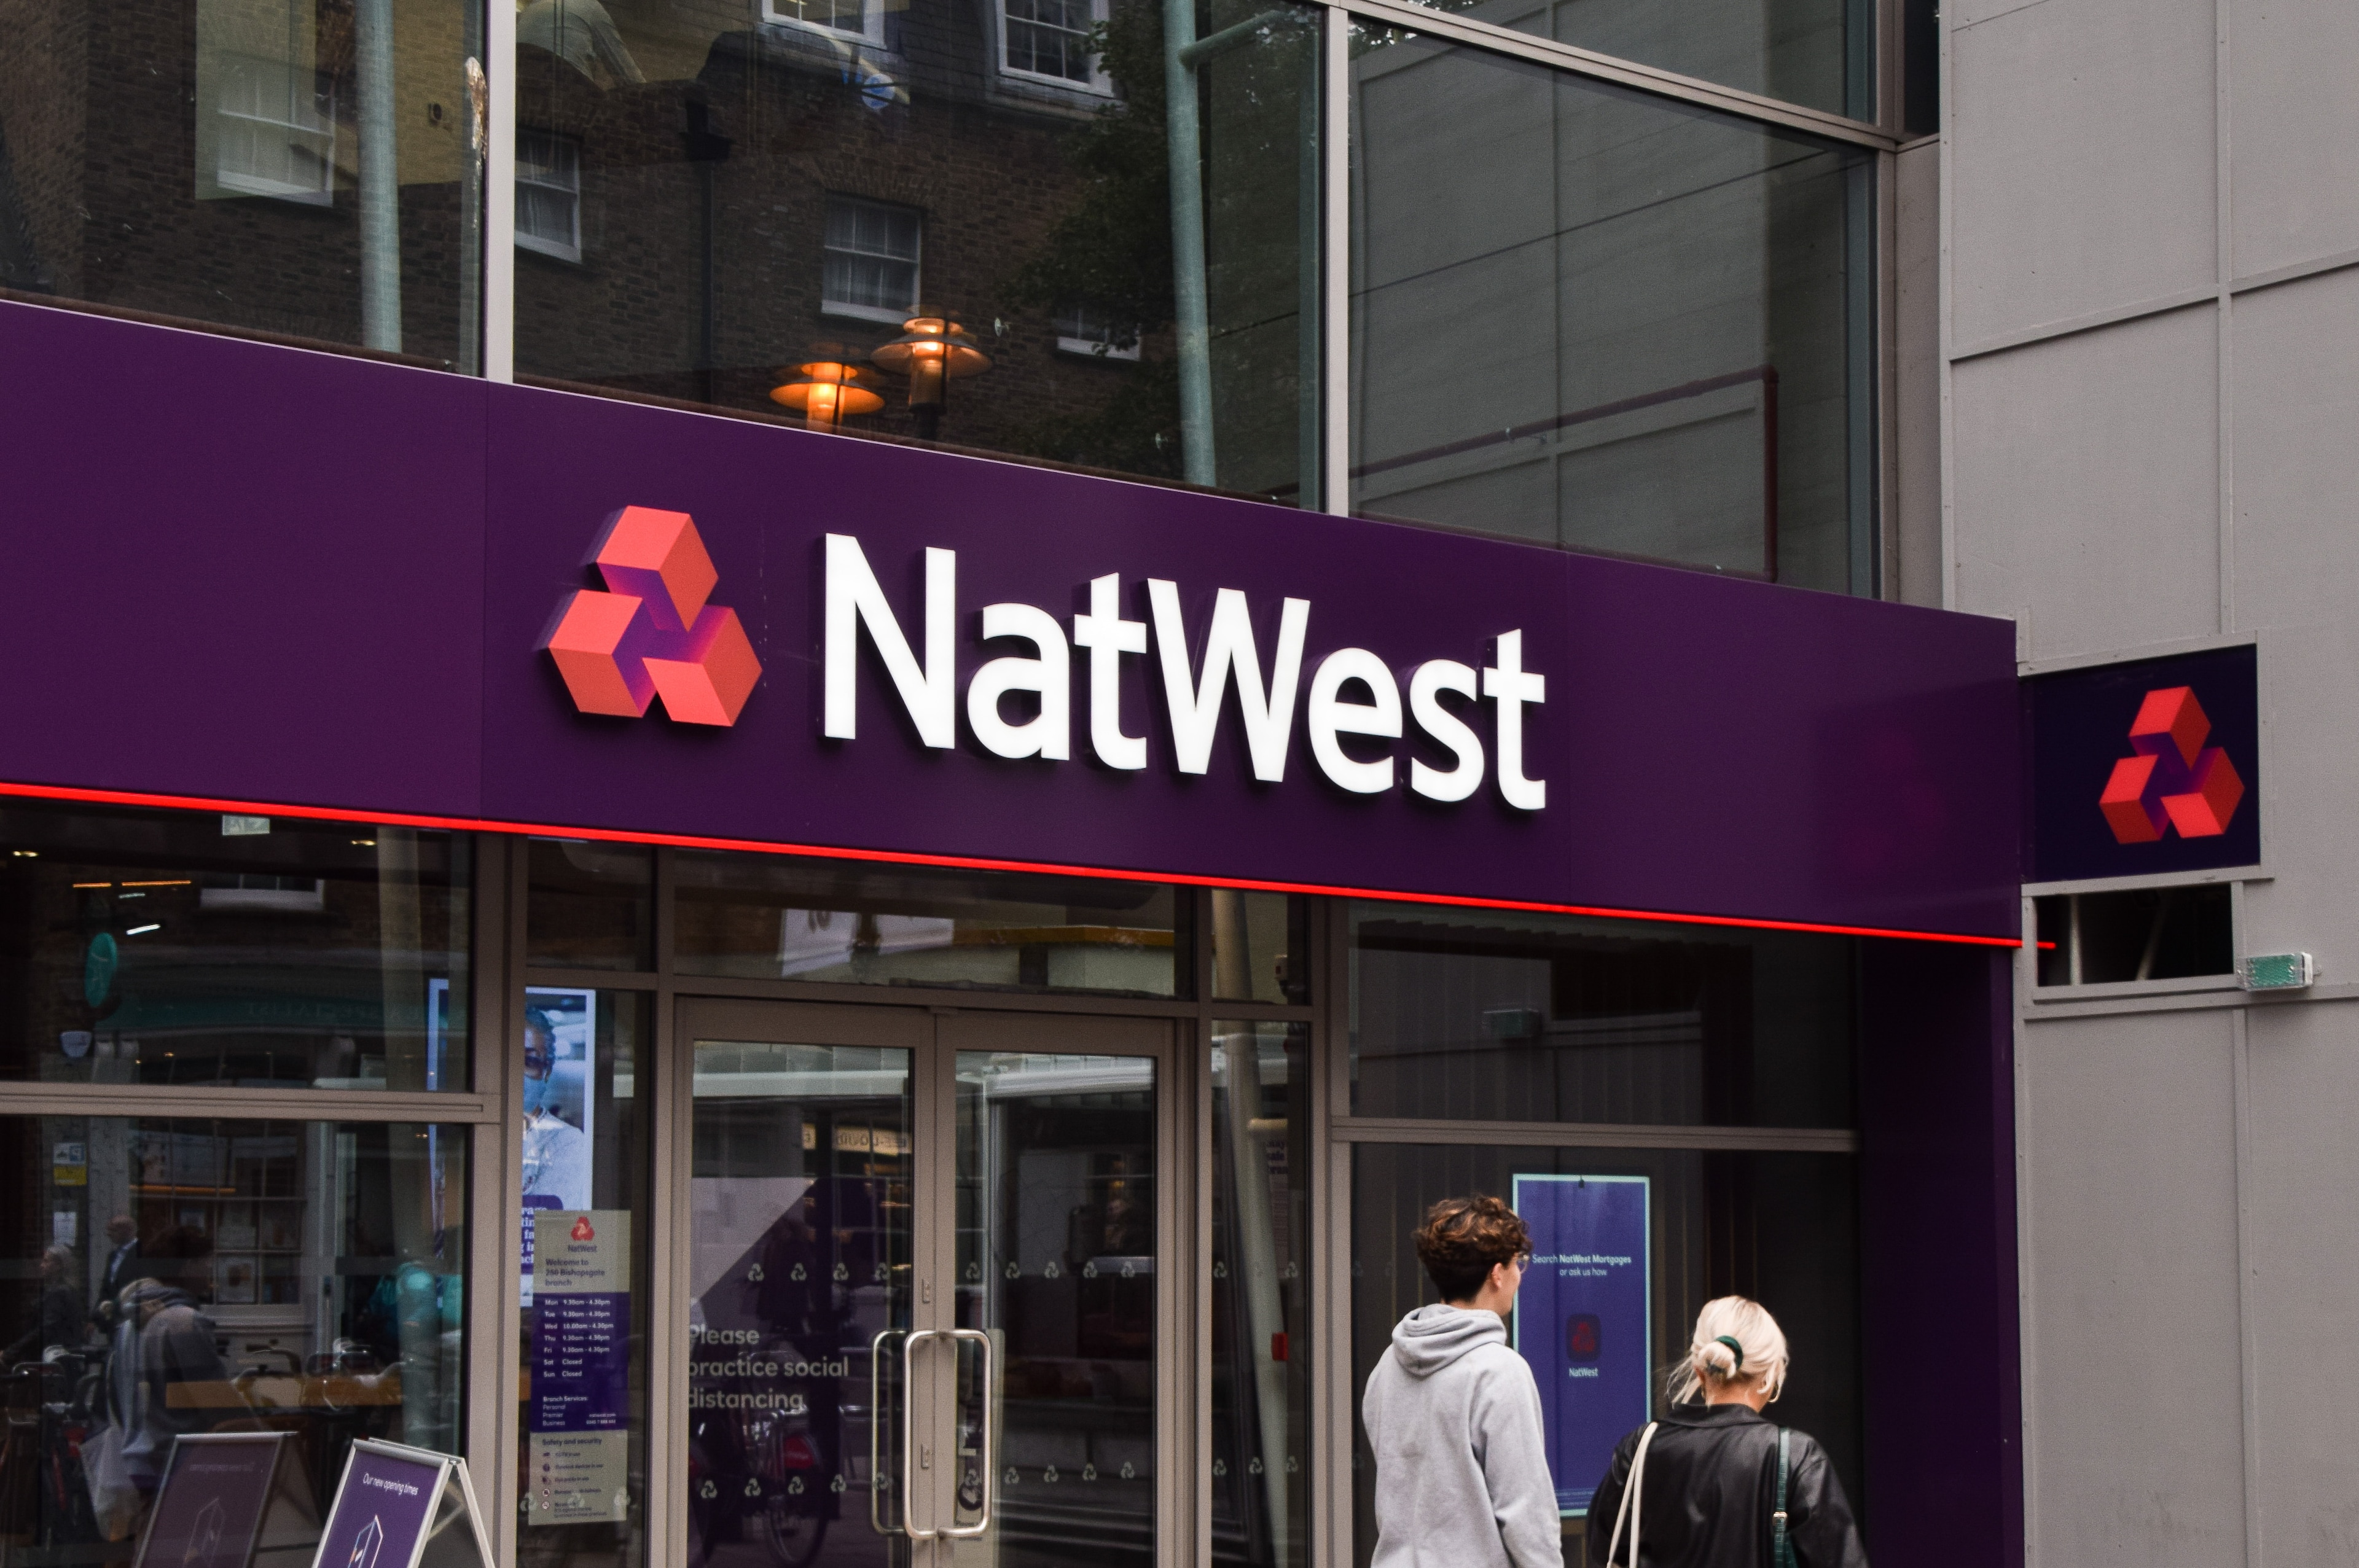 NatWest Bank branch sign